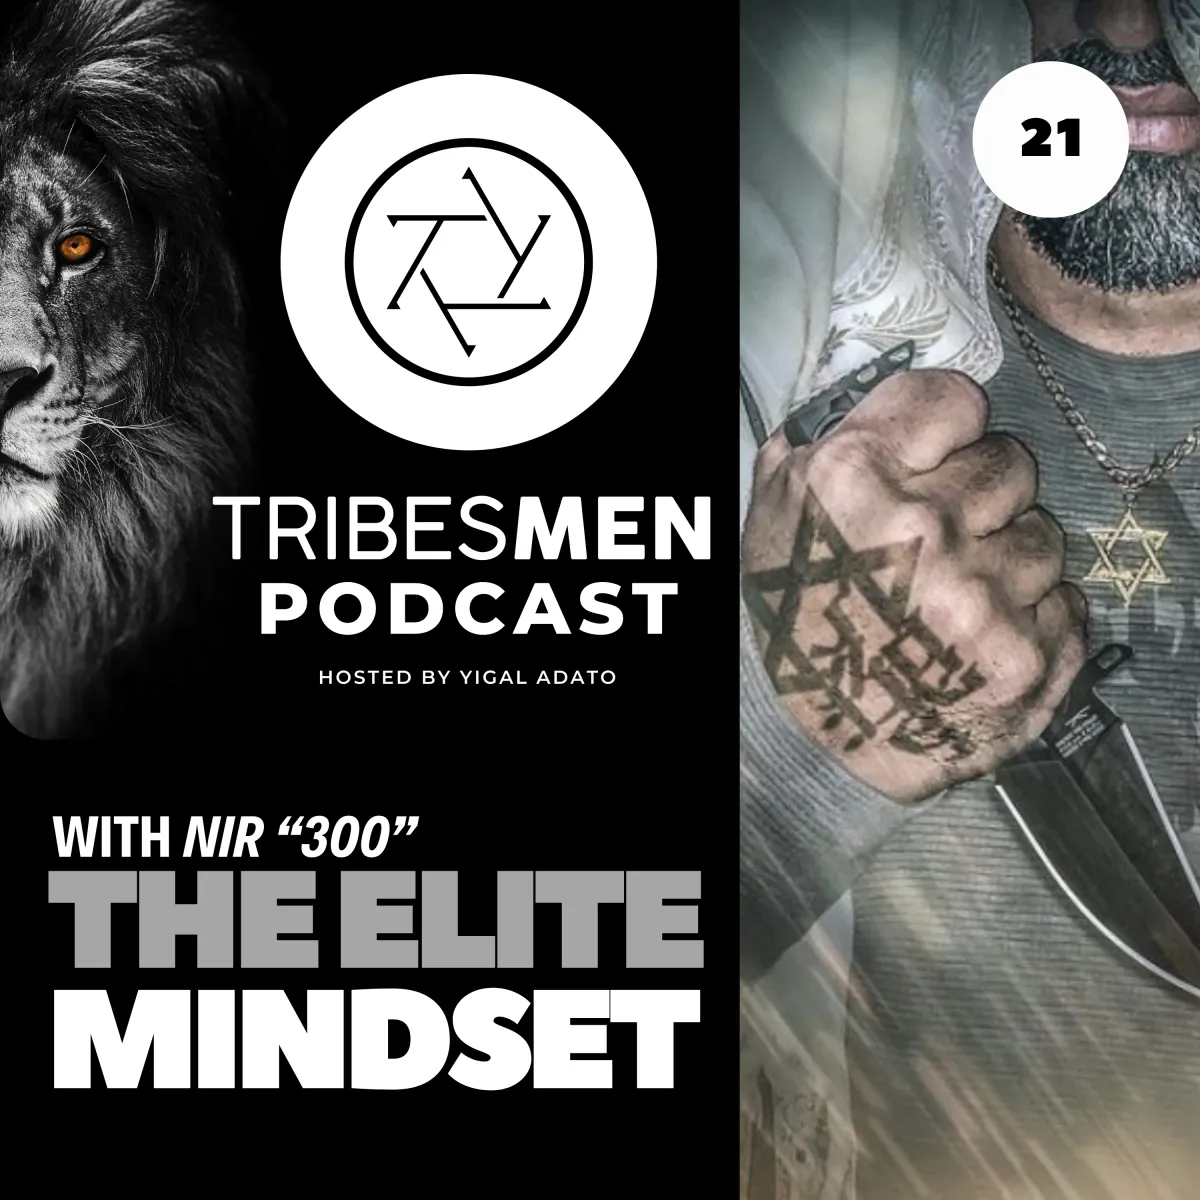 Tribesmen Podcast Episode 1 with Nir 300